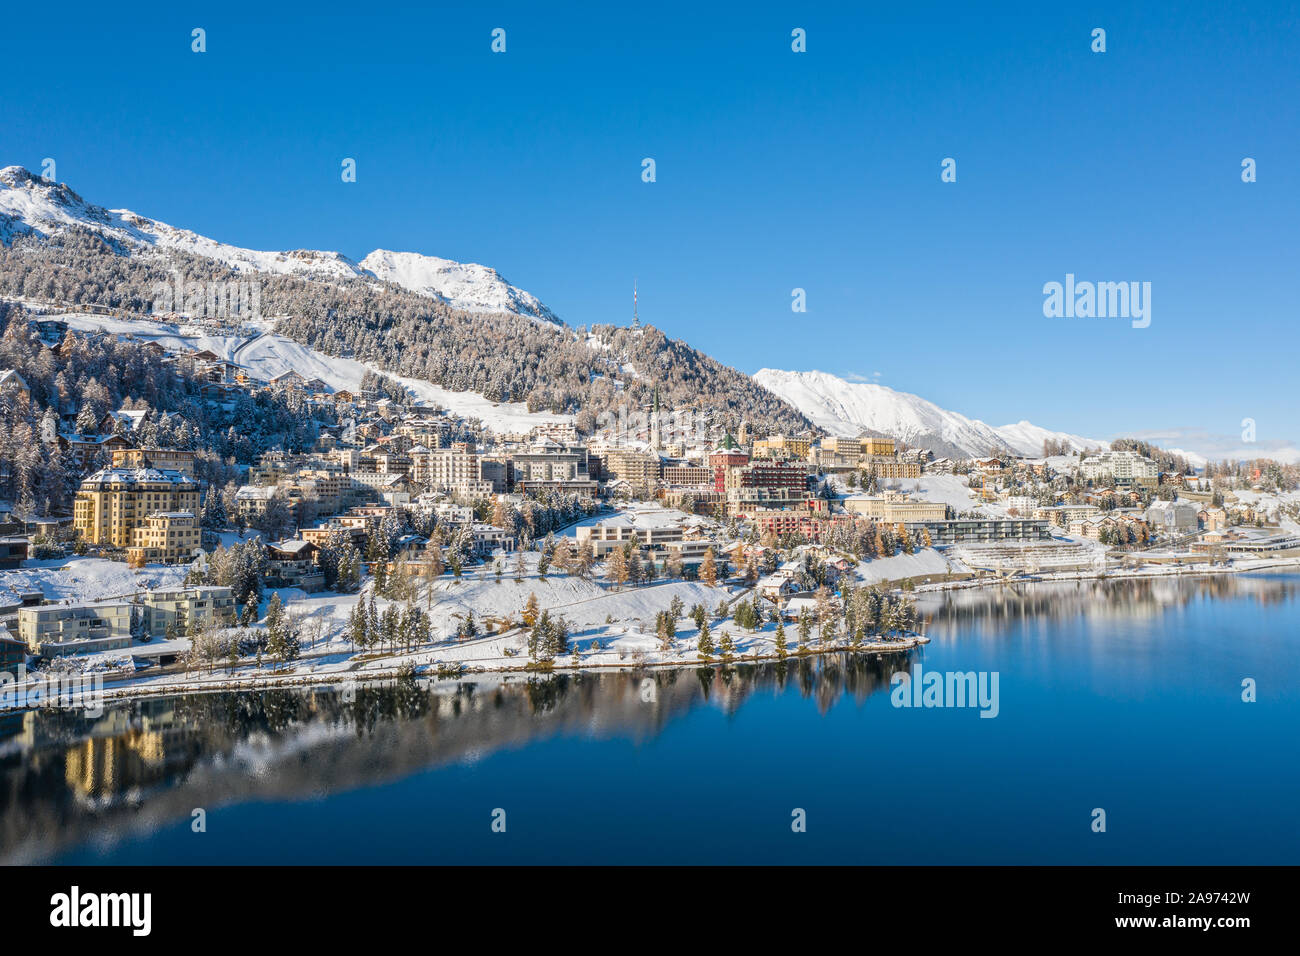 Sankt Moritz, famous place in the Swiss Alps - Alpine lake and beautiful village in winter season Stock Photo